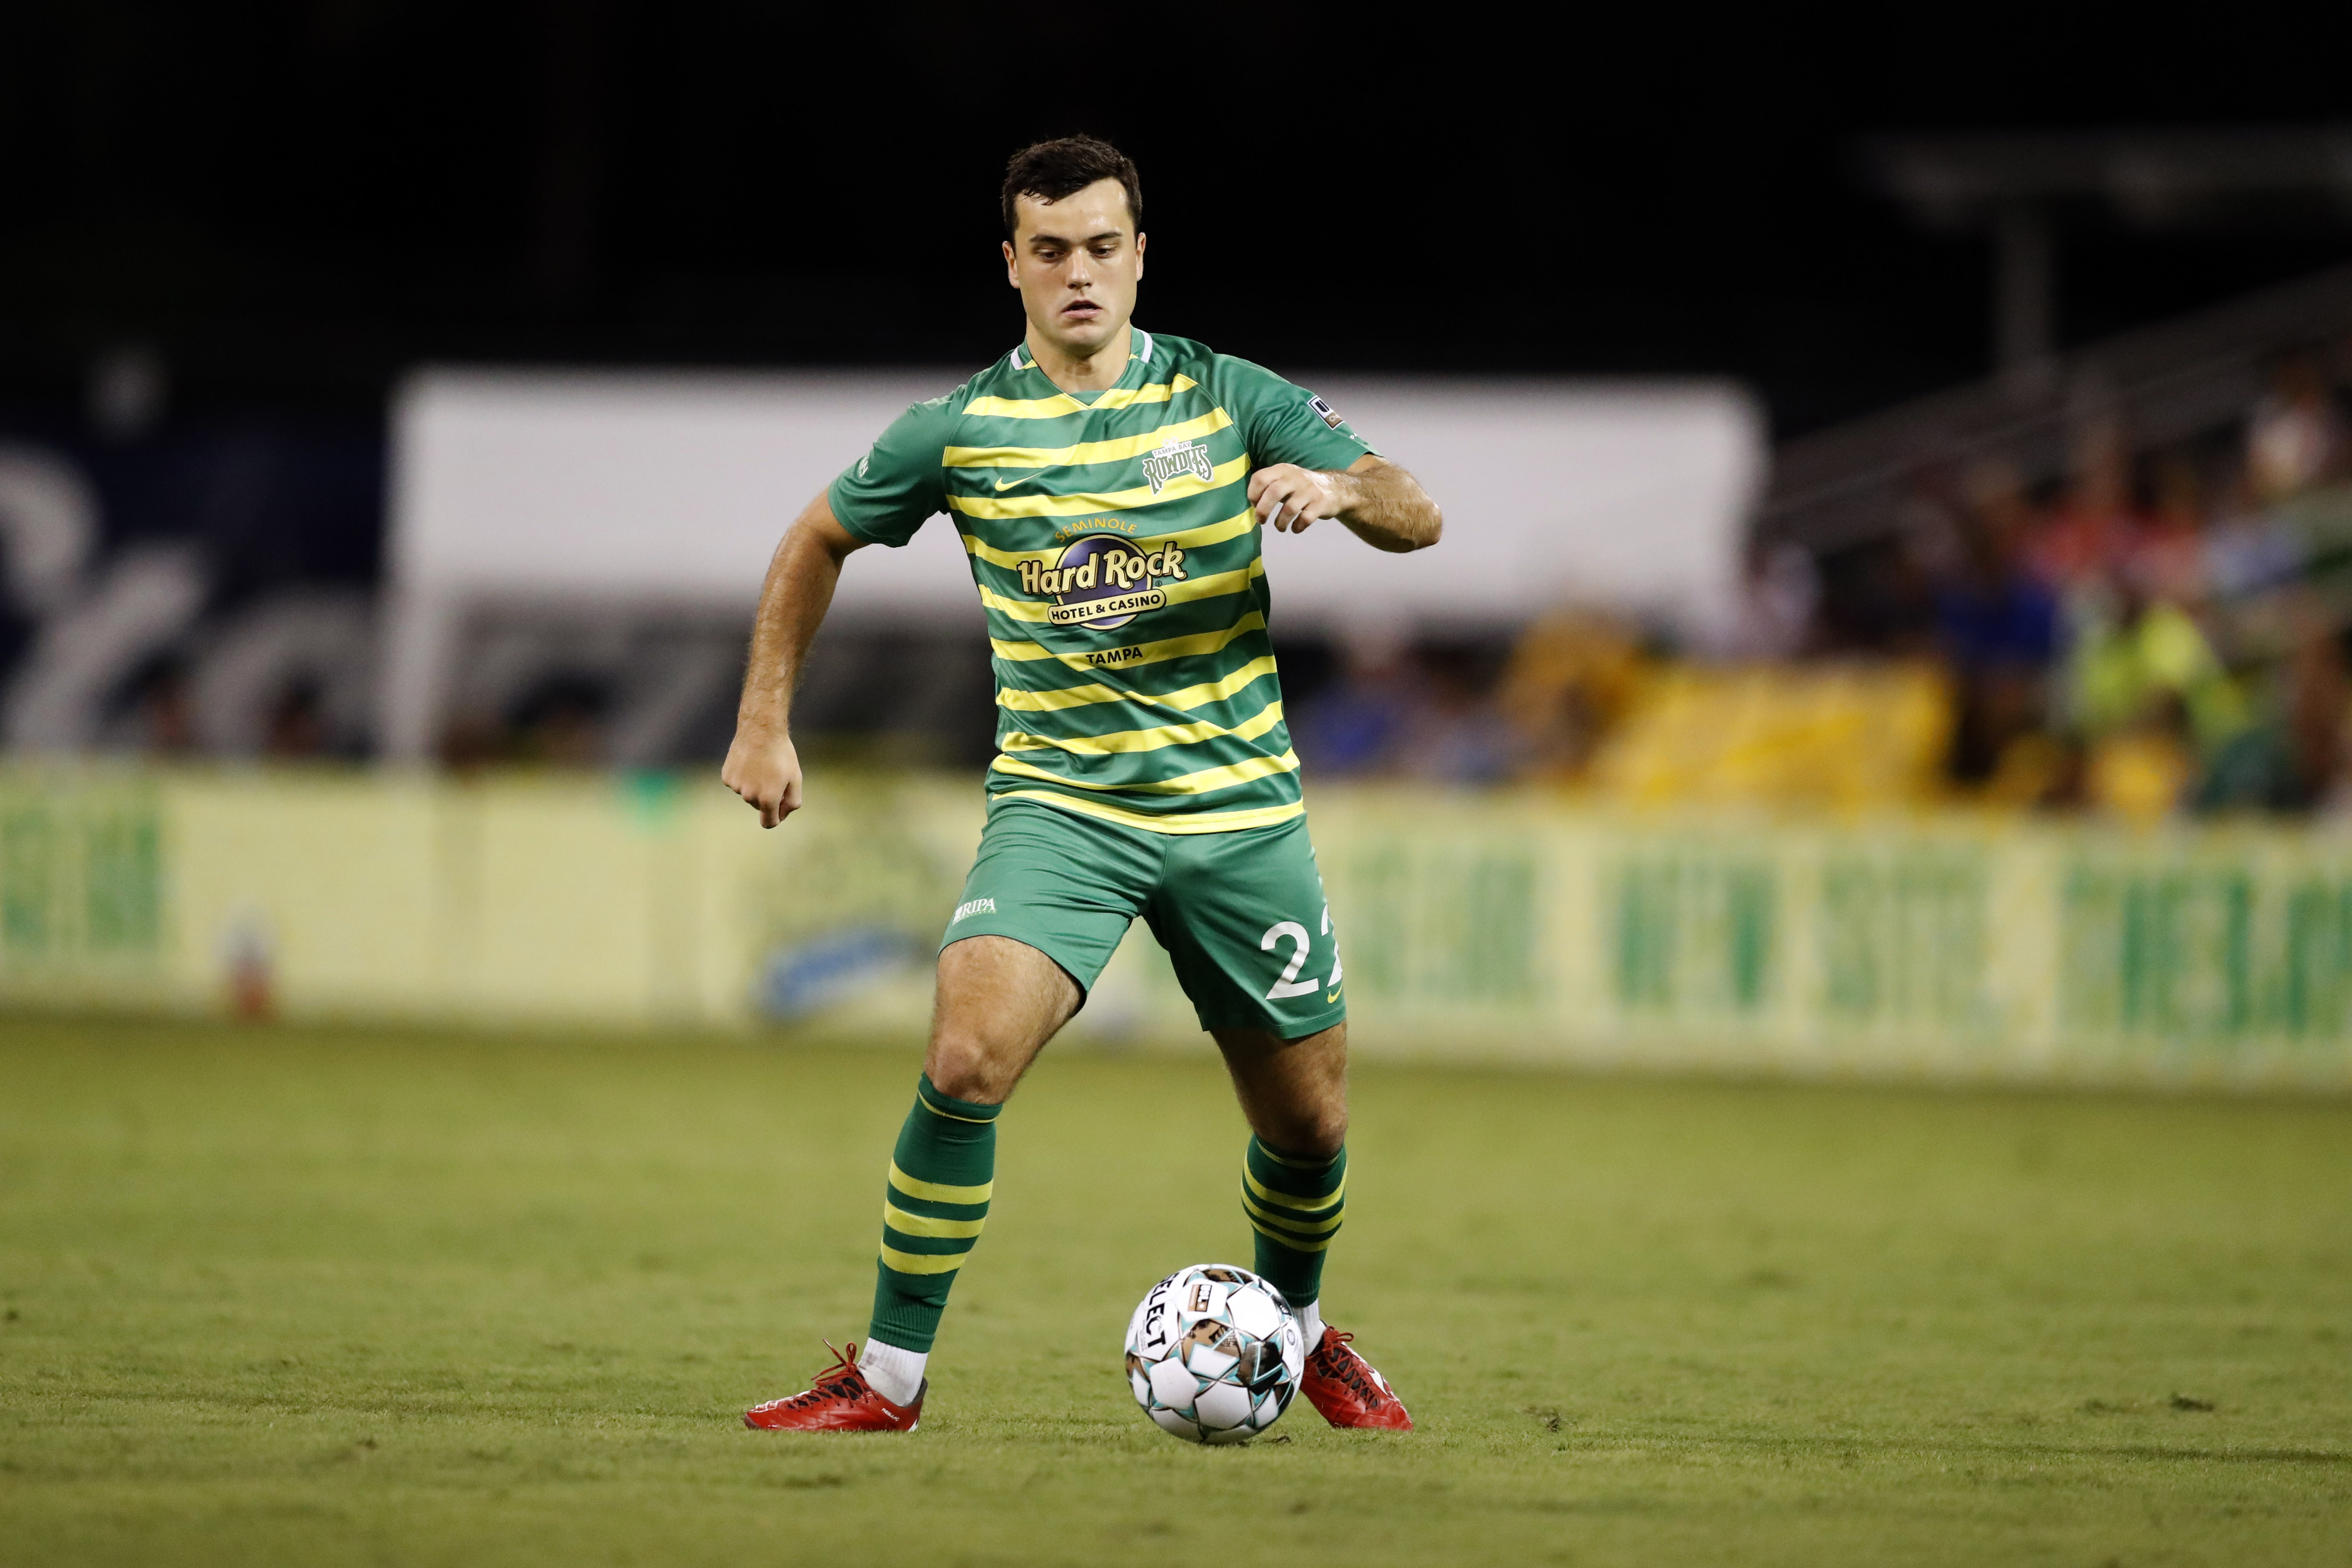 Rowdies Welcome Jordan Doherty Back to Squad - Tampa Bay Rowdies